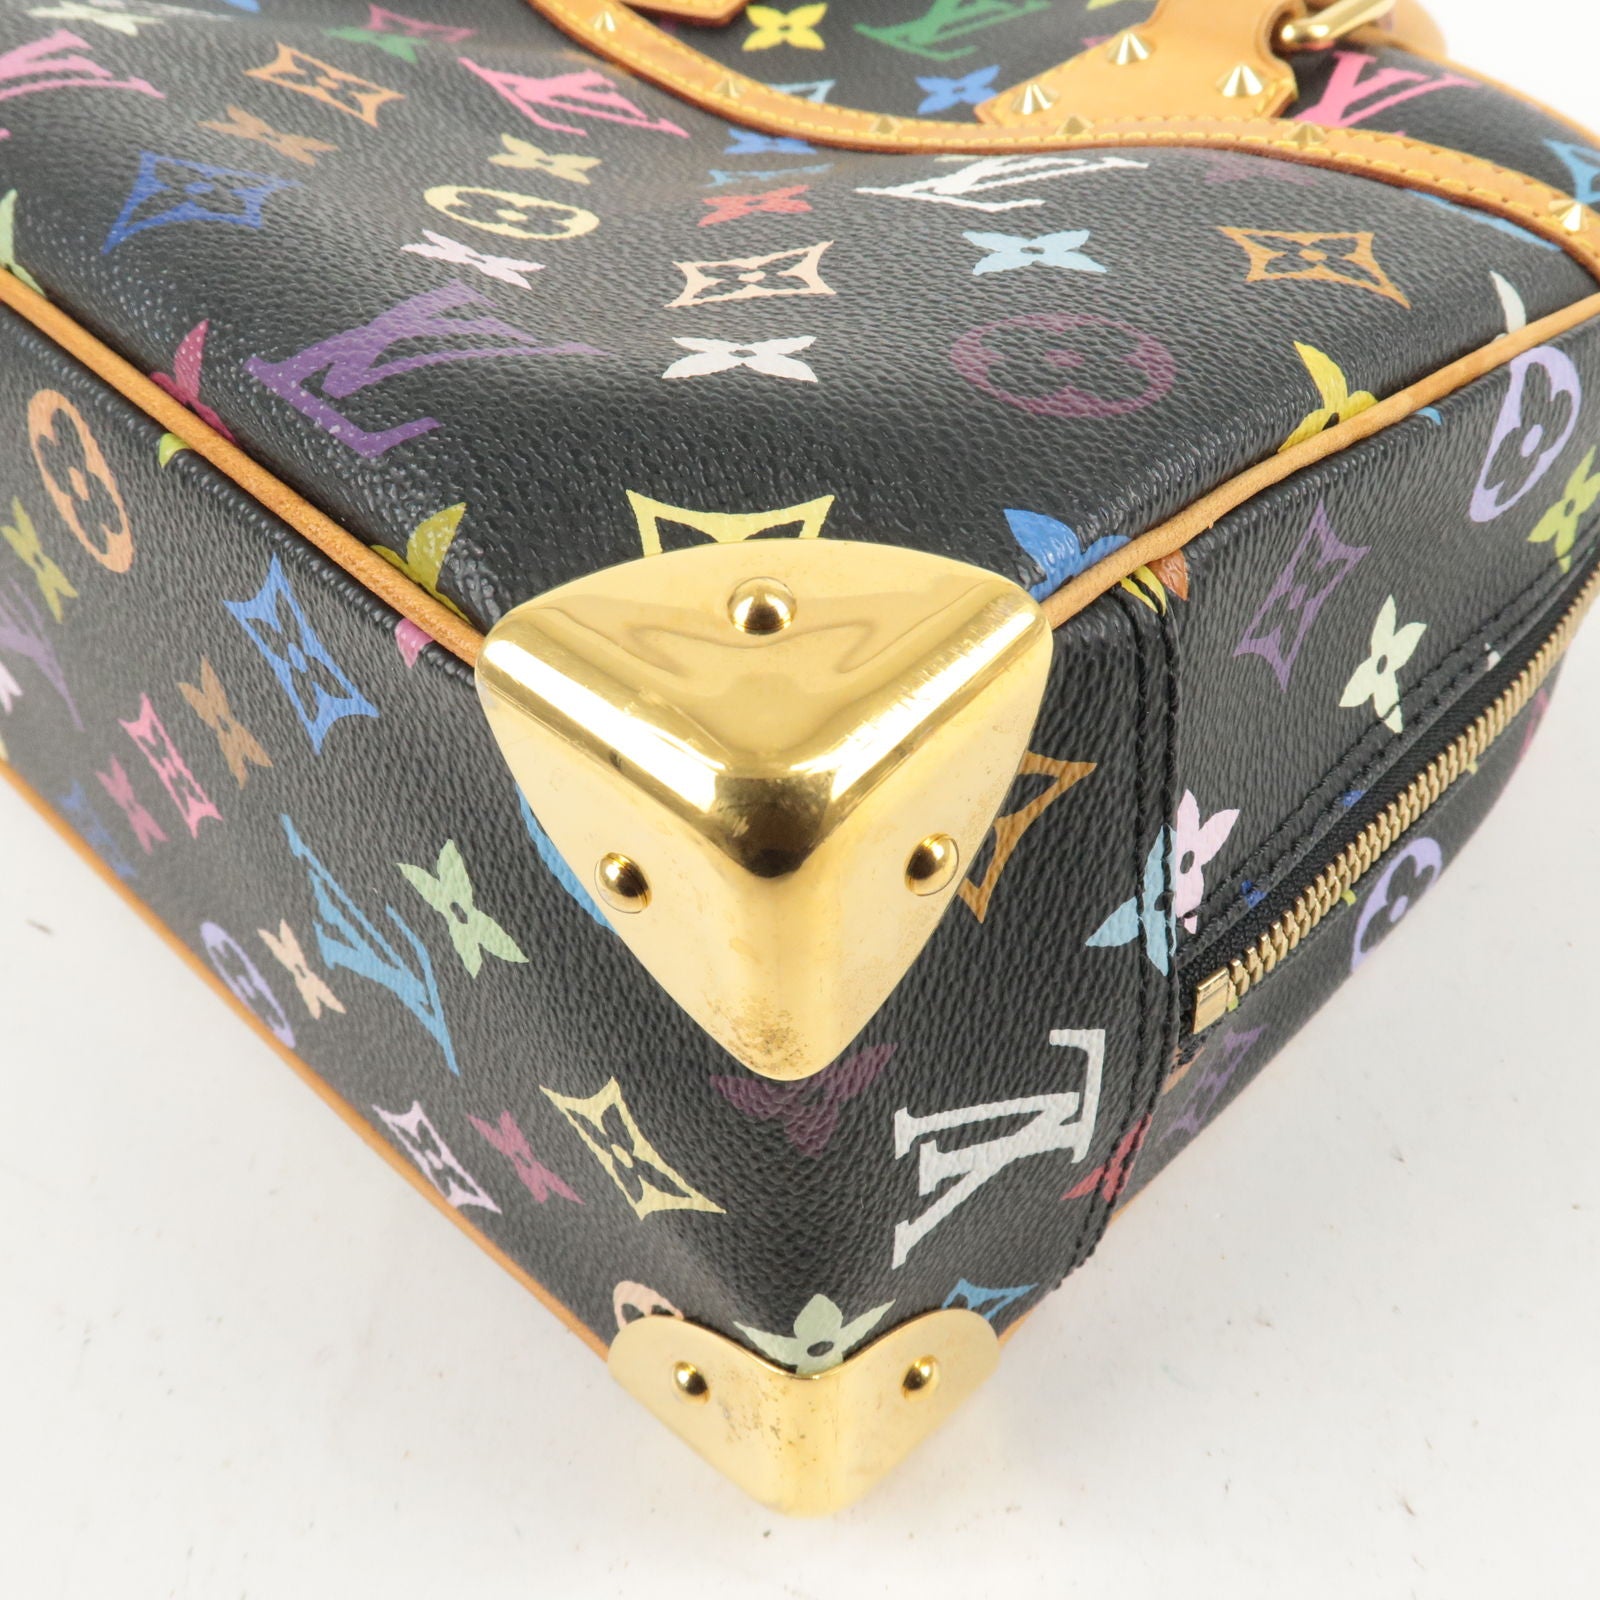 Louis Vuitton 2021 pre-owned Neverfull MM Wild At Heart Tote Bag